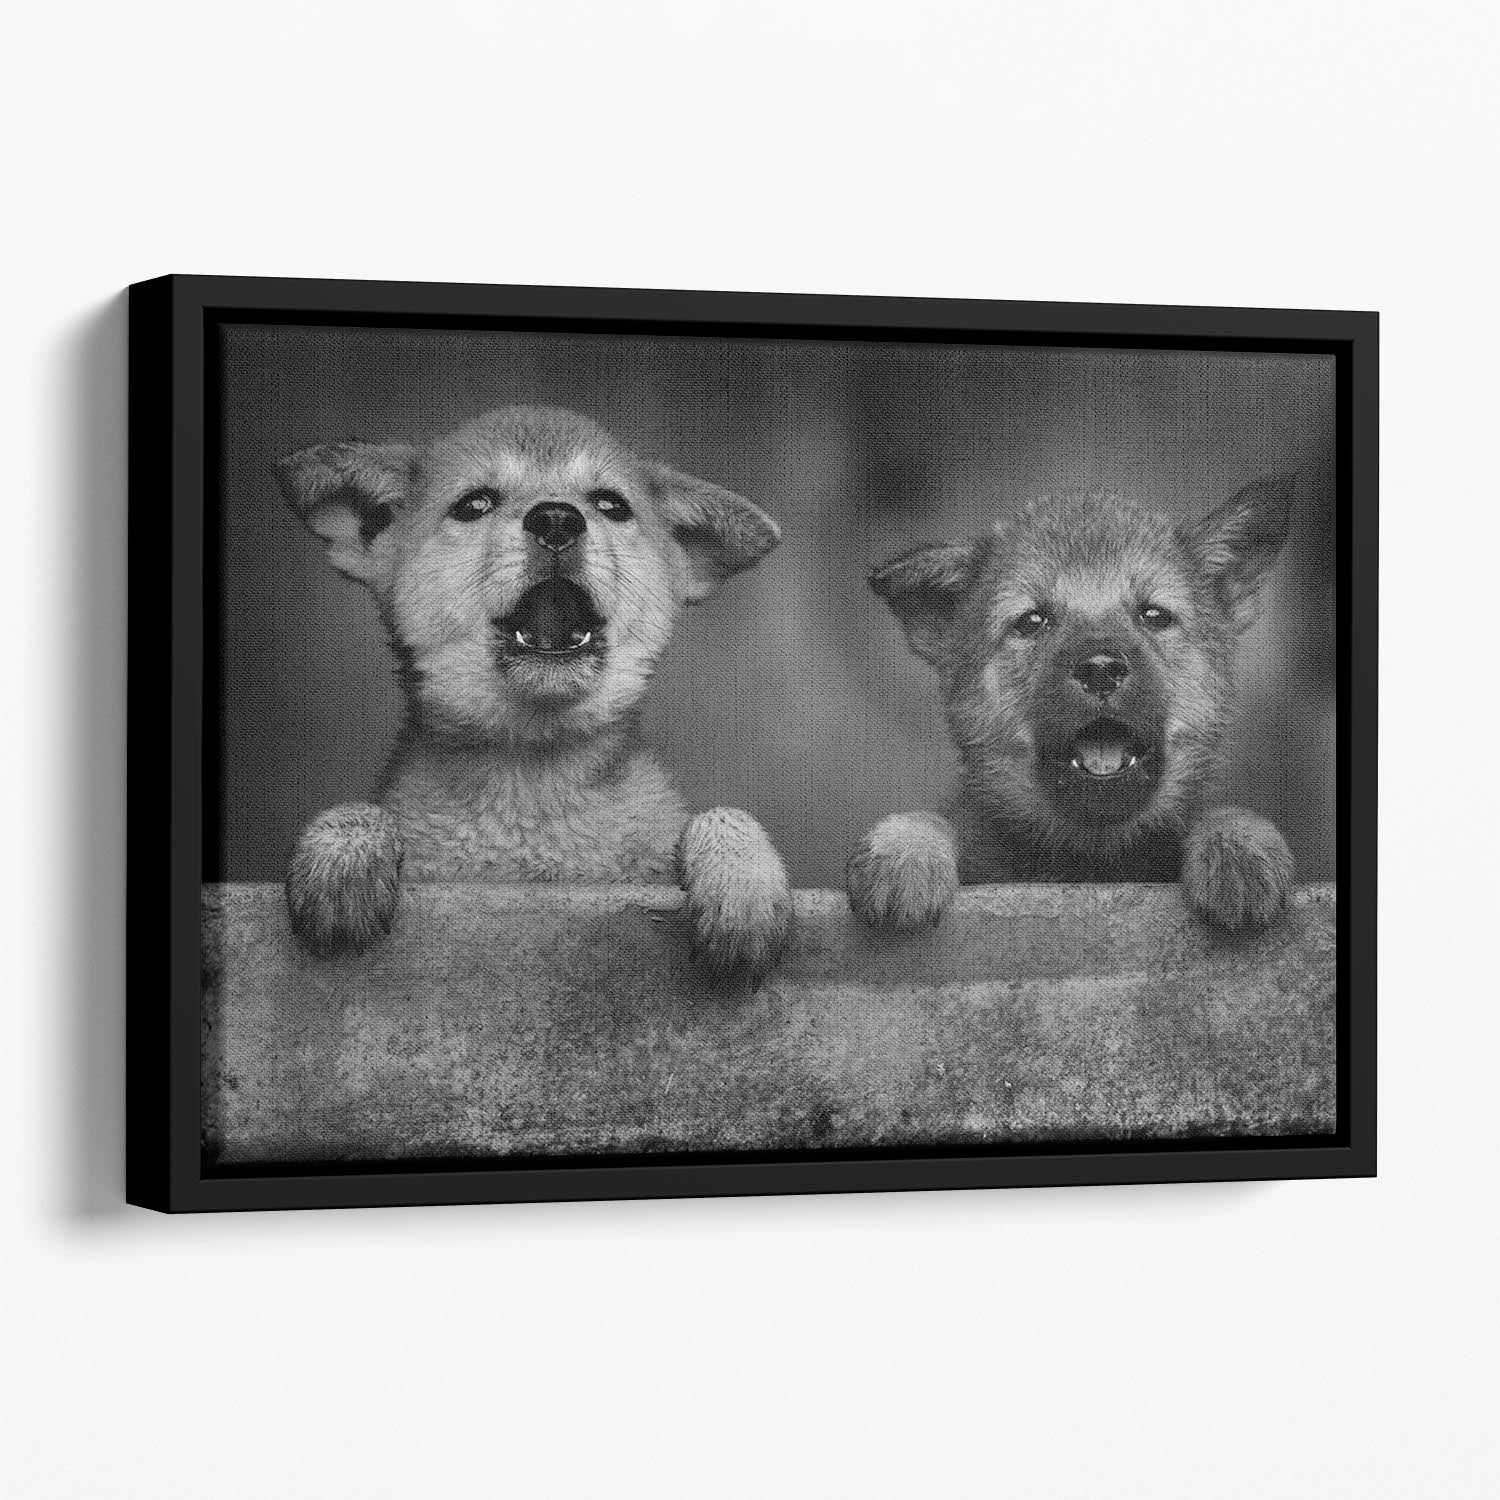 Black and White Puppies Floating Framed Canvas - 1x - 1